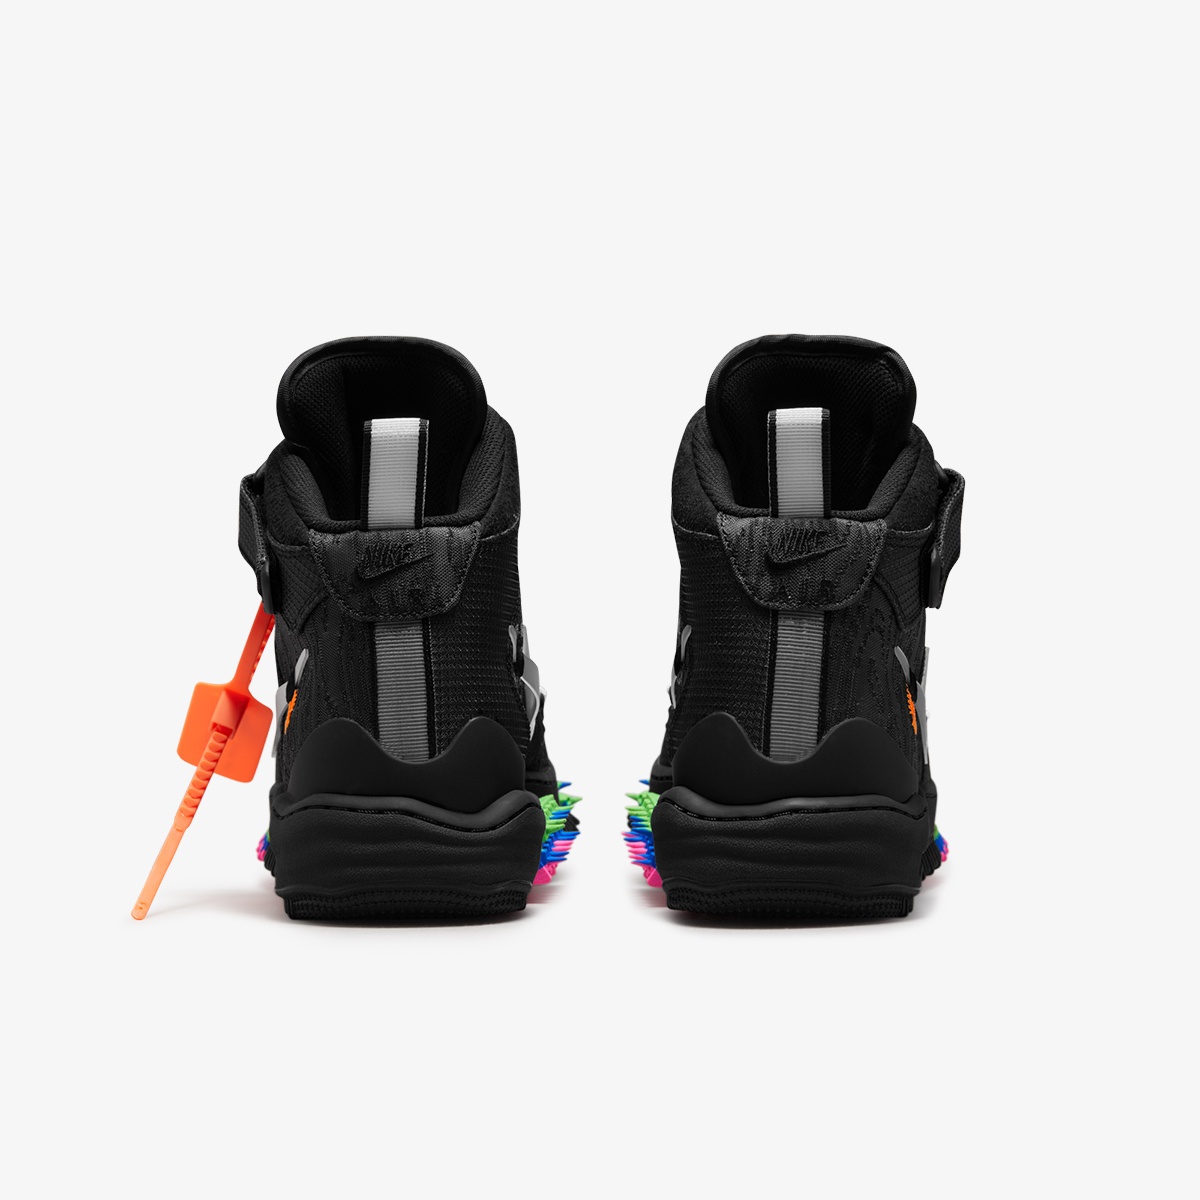 NIKE X OFF-WHITE AIR FORCE 1 MID SP - REGISTER NOW | END. (US)